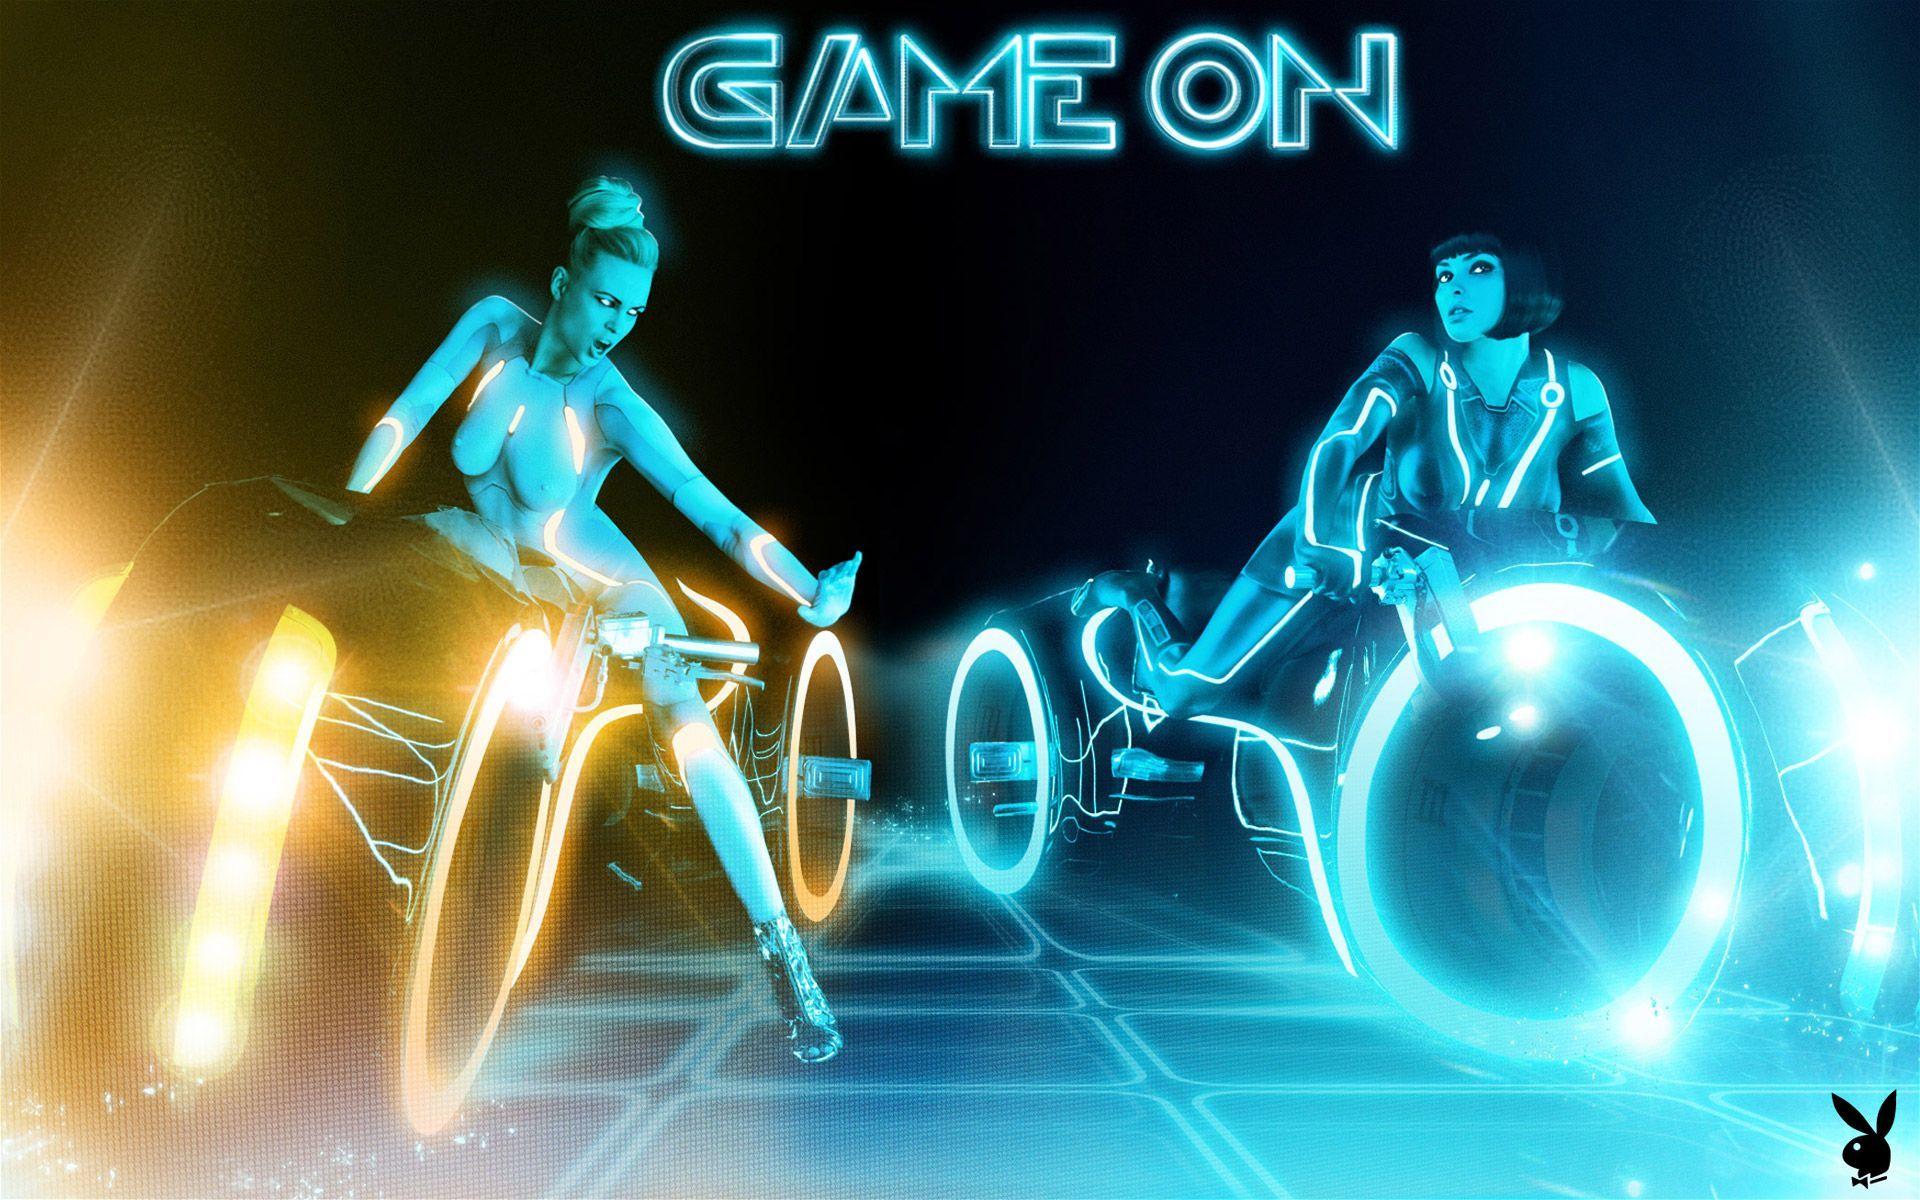 tron legacy light cycle of Movie wallpaper HD wallpaper for 1920